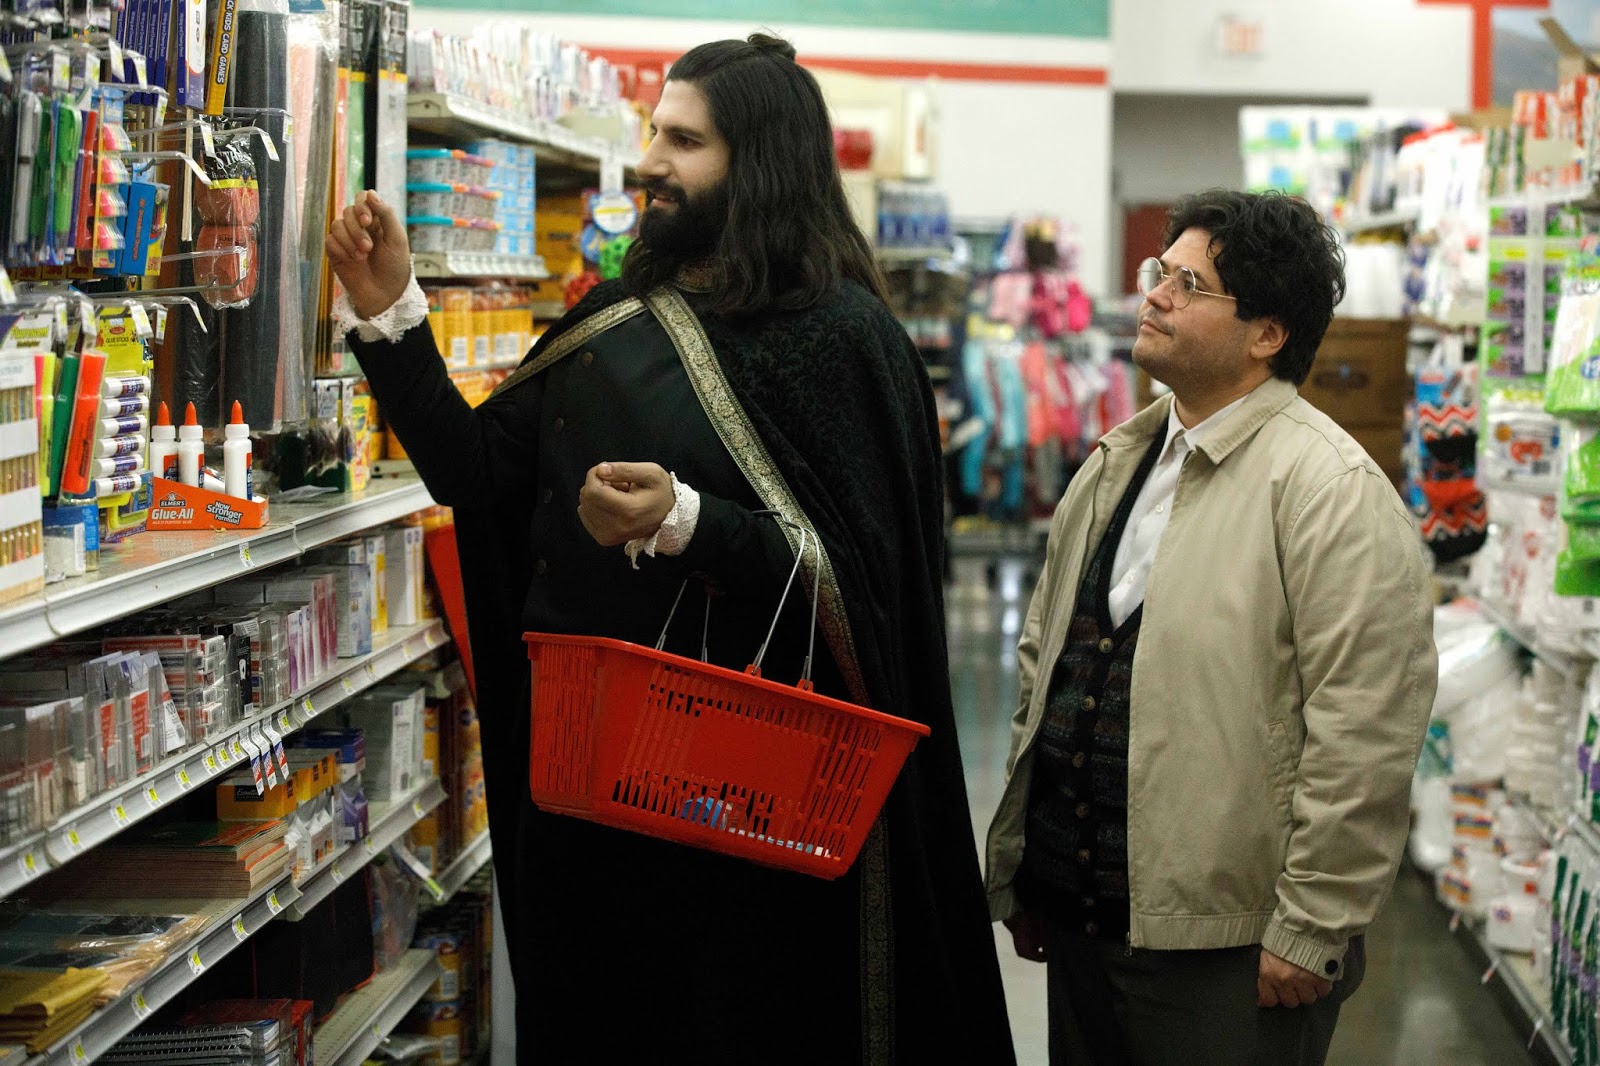 Nandor in full vampire garb and Guillermo in a supermarket. Nandor is holding a shopping basket and looking at craft supplies.